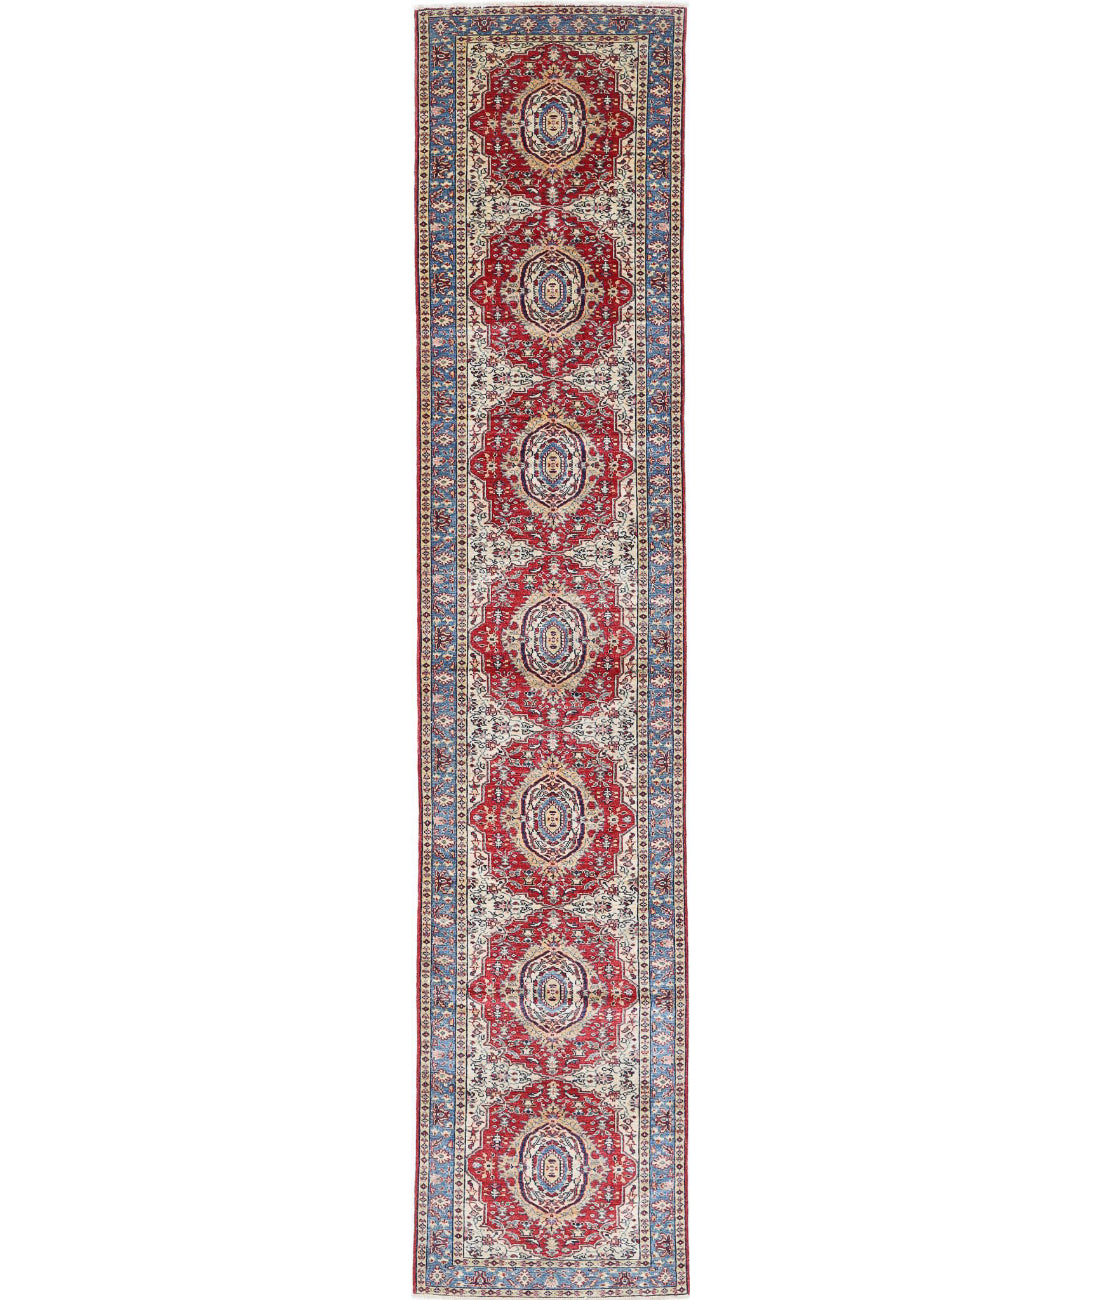 Hand Knotted Royal Kazak Wool Rug - 2&#39;8&#39;&#39; x 13&#39;9&#39;&#39; 2&#39;8&#39;&#39; x 13&#39;9&#39;&#39; (80 X 413) / Red / Blue